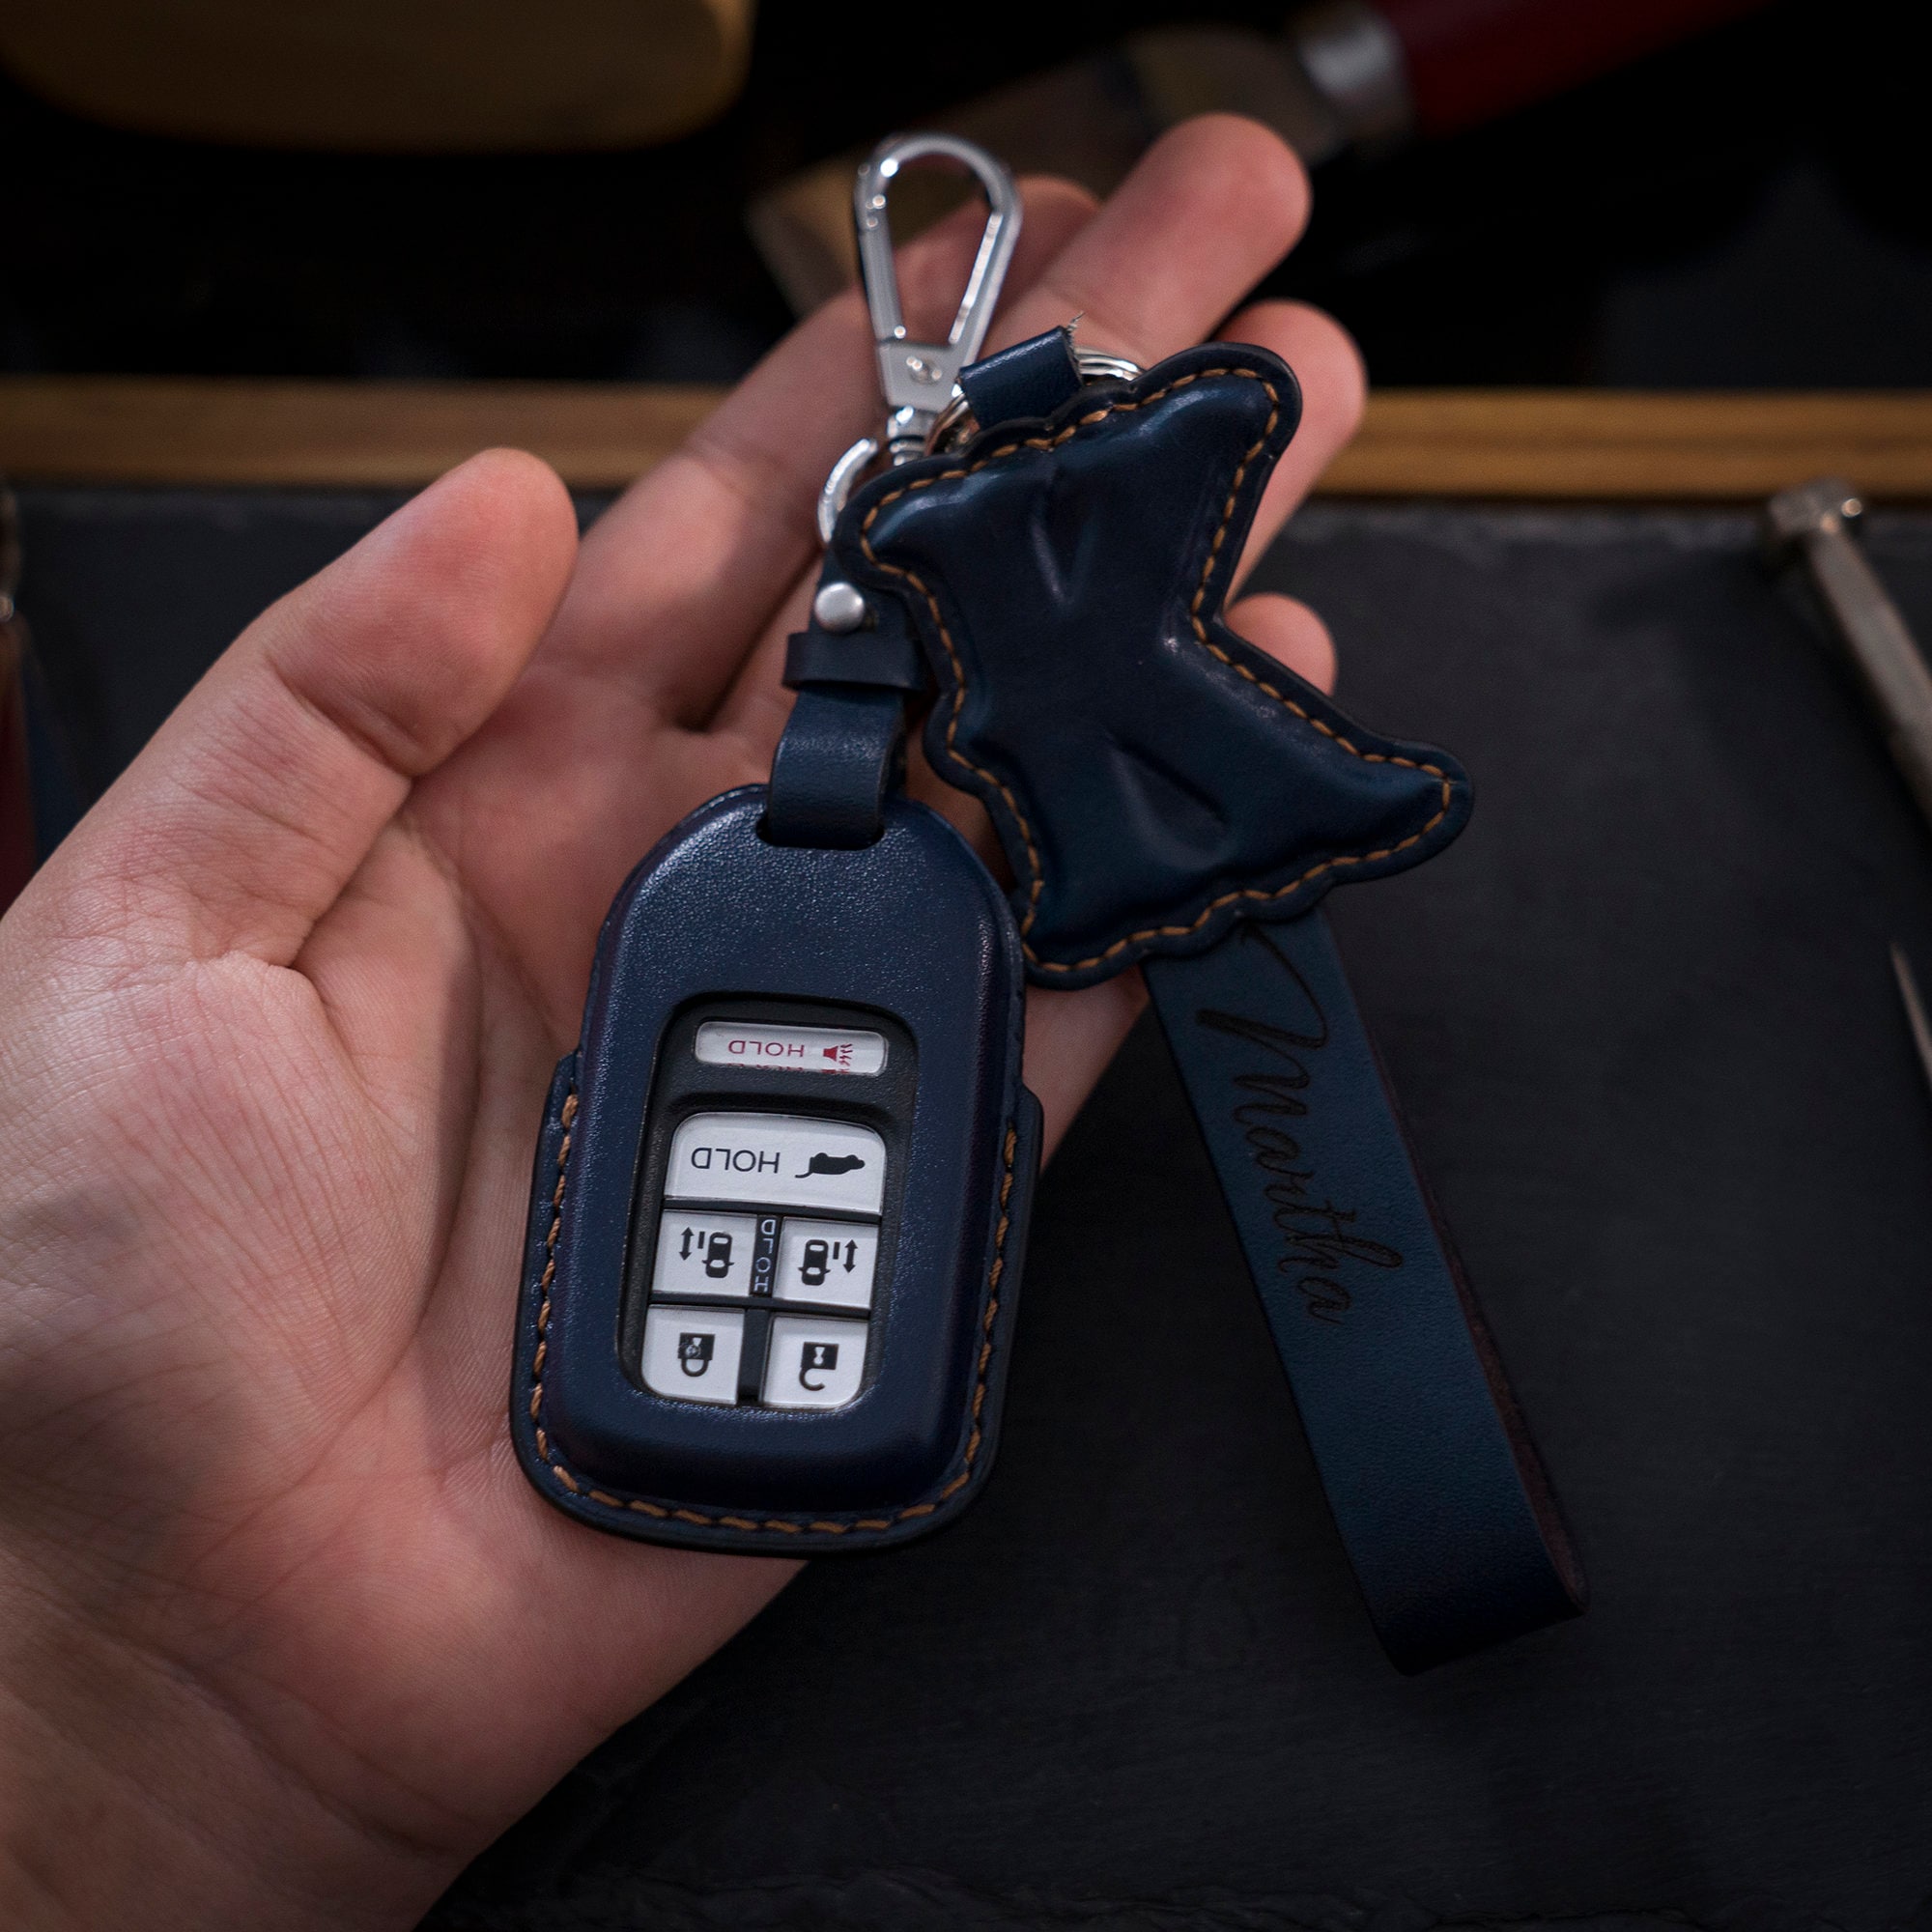 Auto Car Keychain Leather Business Key Chain for Key Fob and Key With Key  Ring and Metal Carabiner Hook, Land Rover price in UAE,  UAE